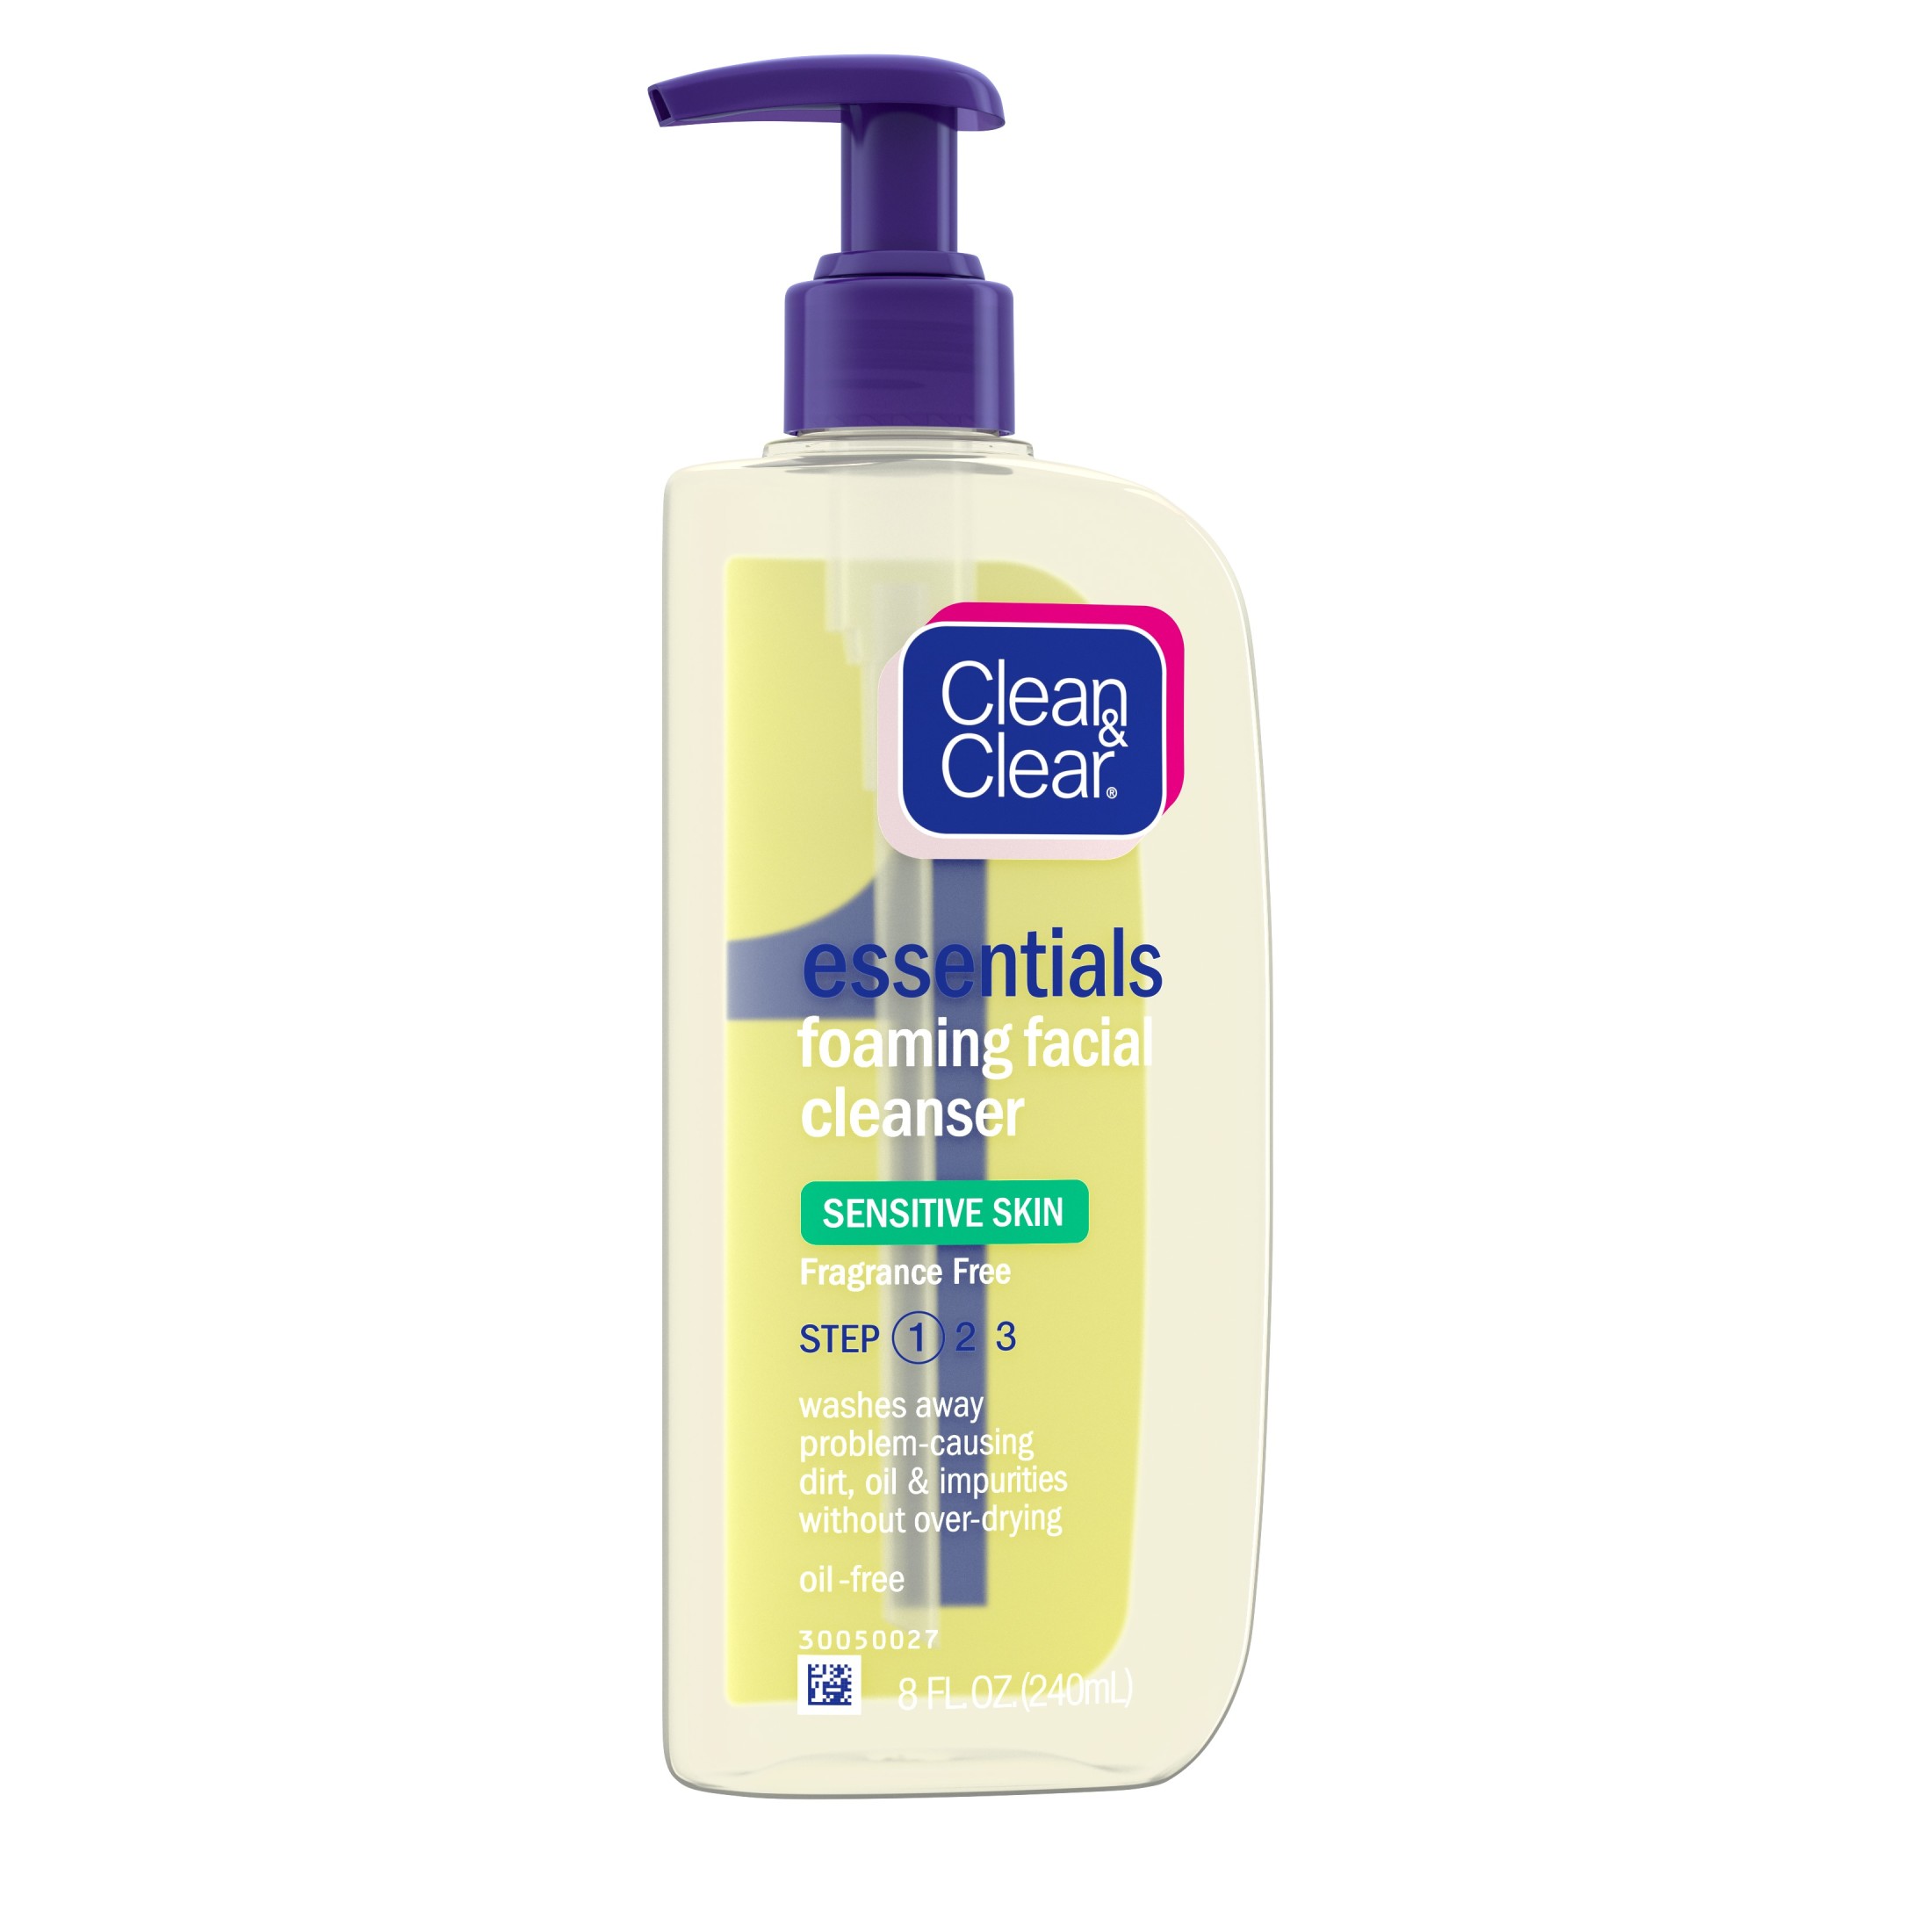 Clean & Clear Essentials Foaming Face Wash for Sensitive Skin 8 fl. oz - image 5 of 8